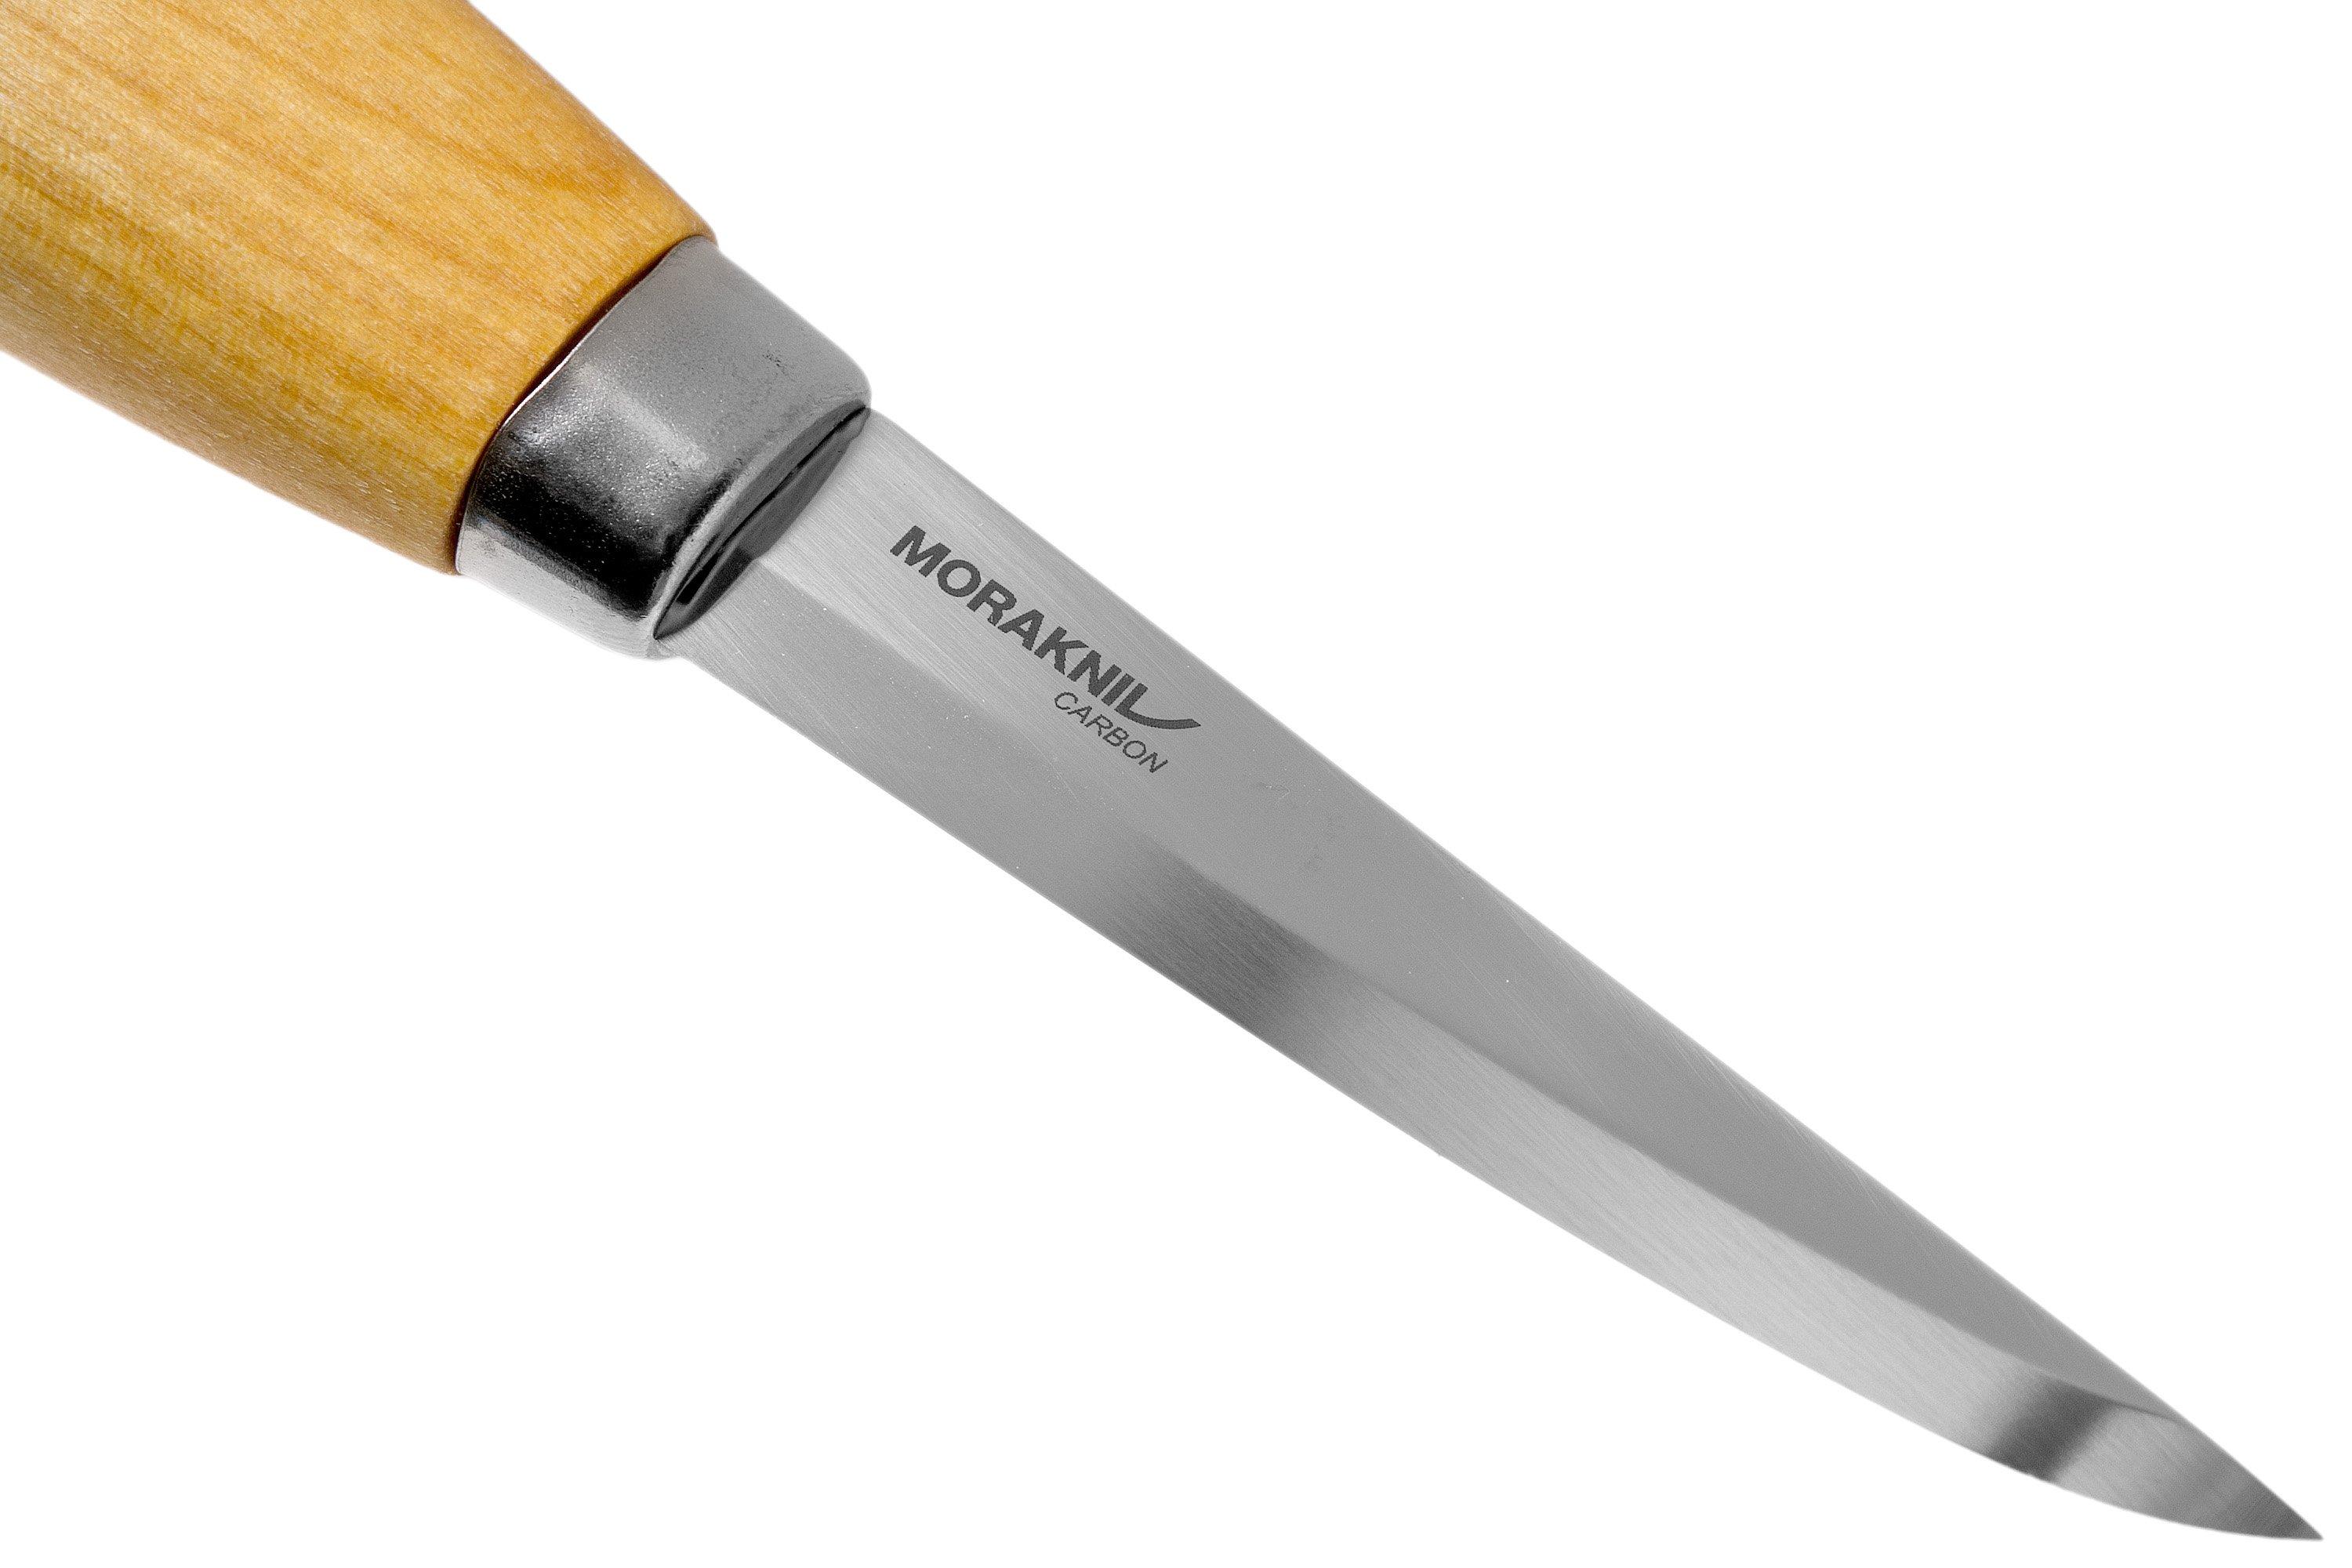  Morakniv 106 Carbon Steel Wood Carving Knife With Sheath, 3.25  Inch: Home & Kitchen